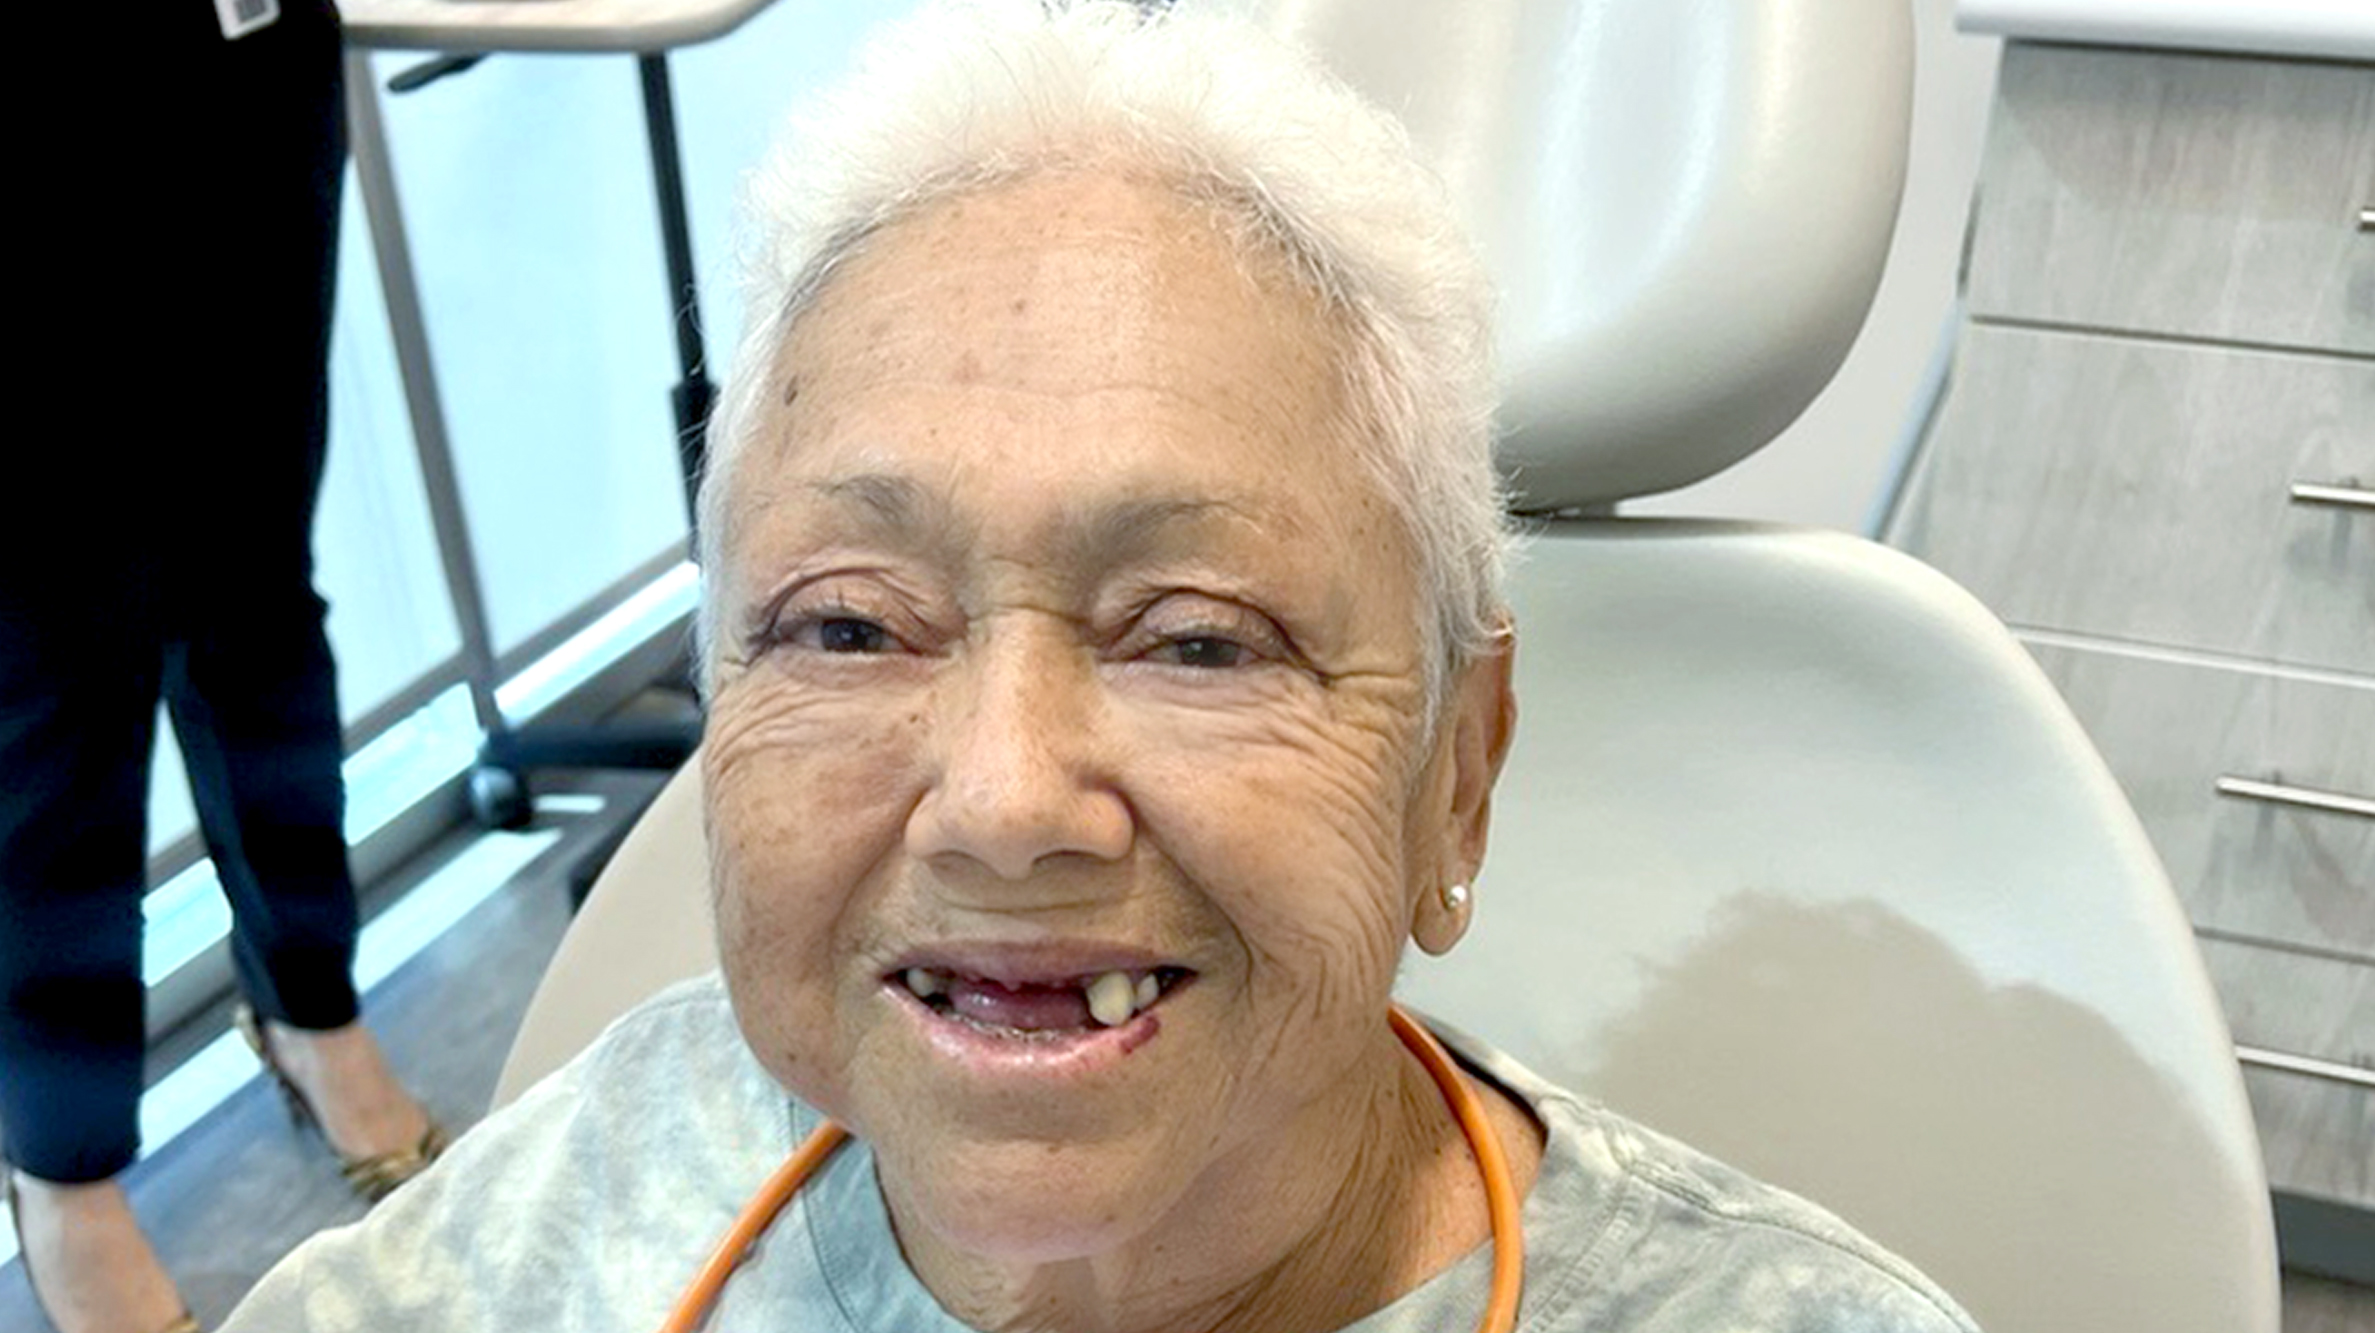 Patient's smile line with missing teeth #6–10.